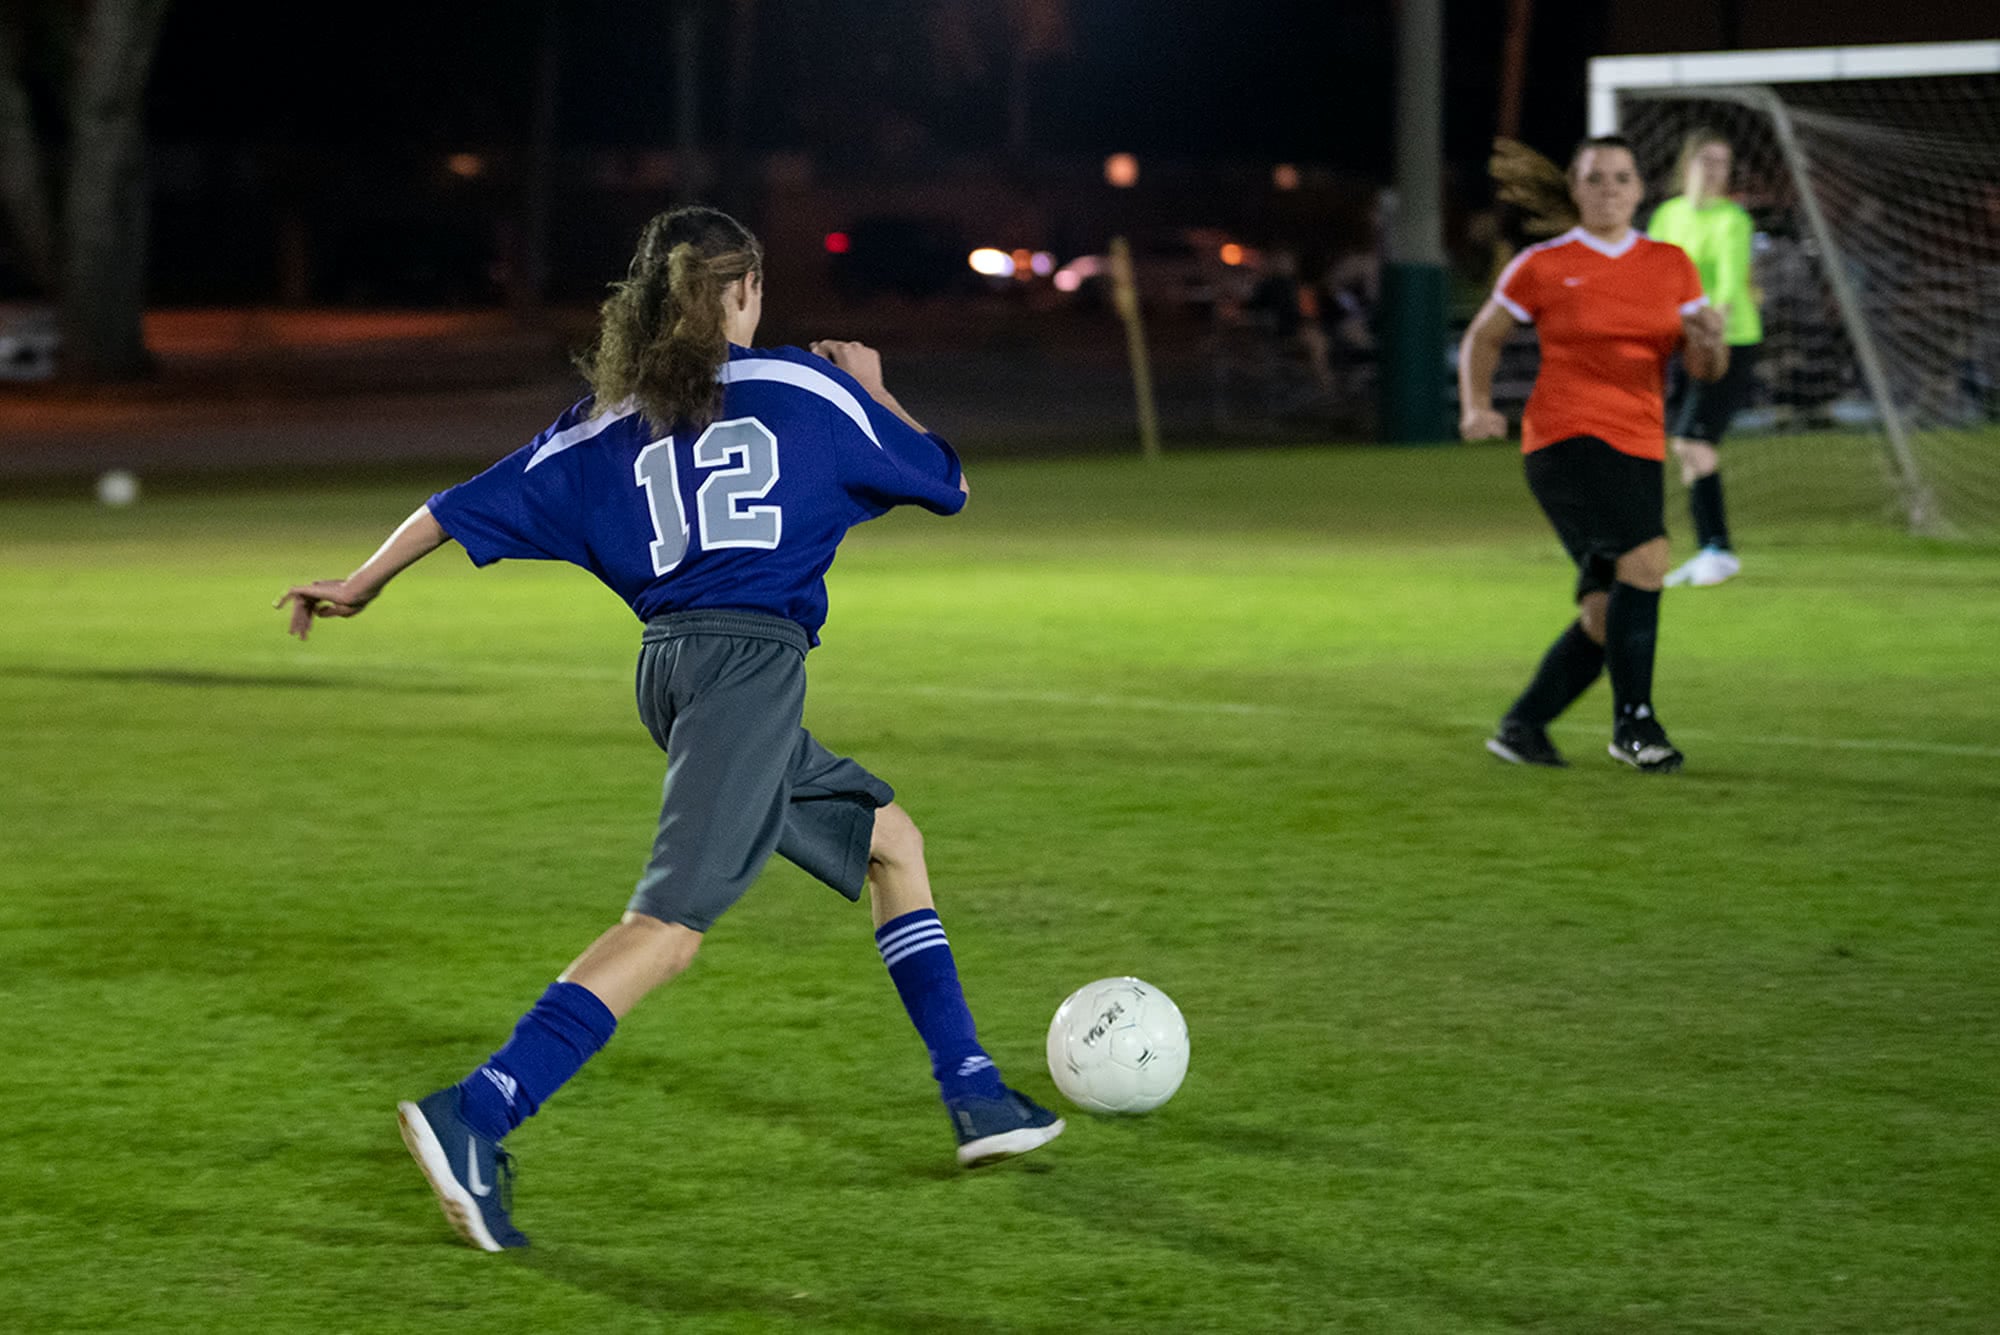 Women's collegian soccer player aiming to kick a soccer ball into the goal. 